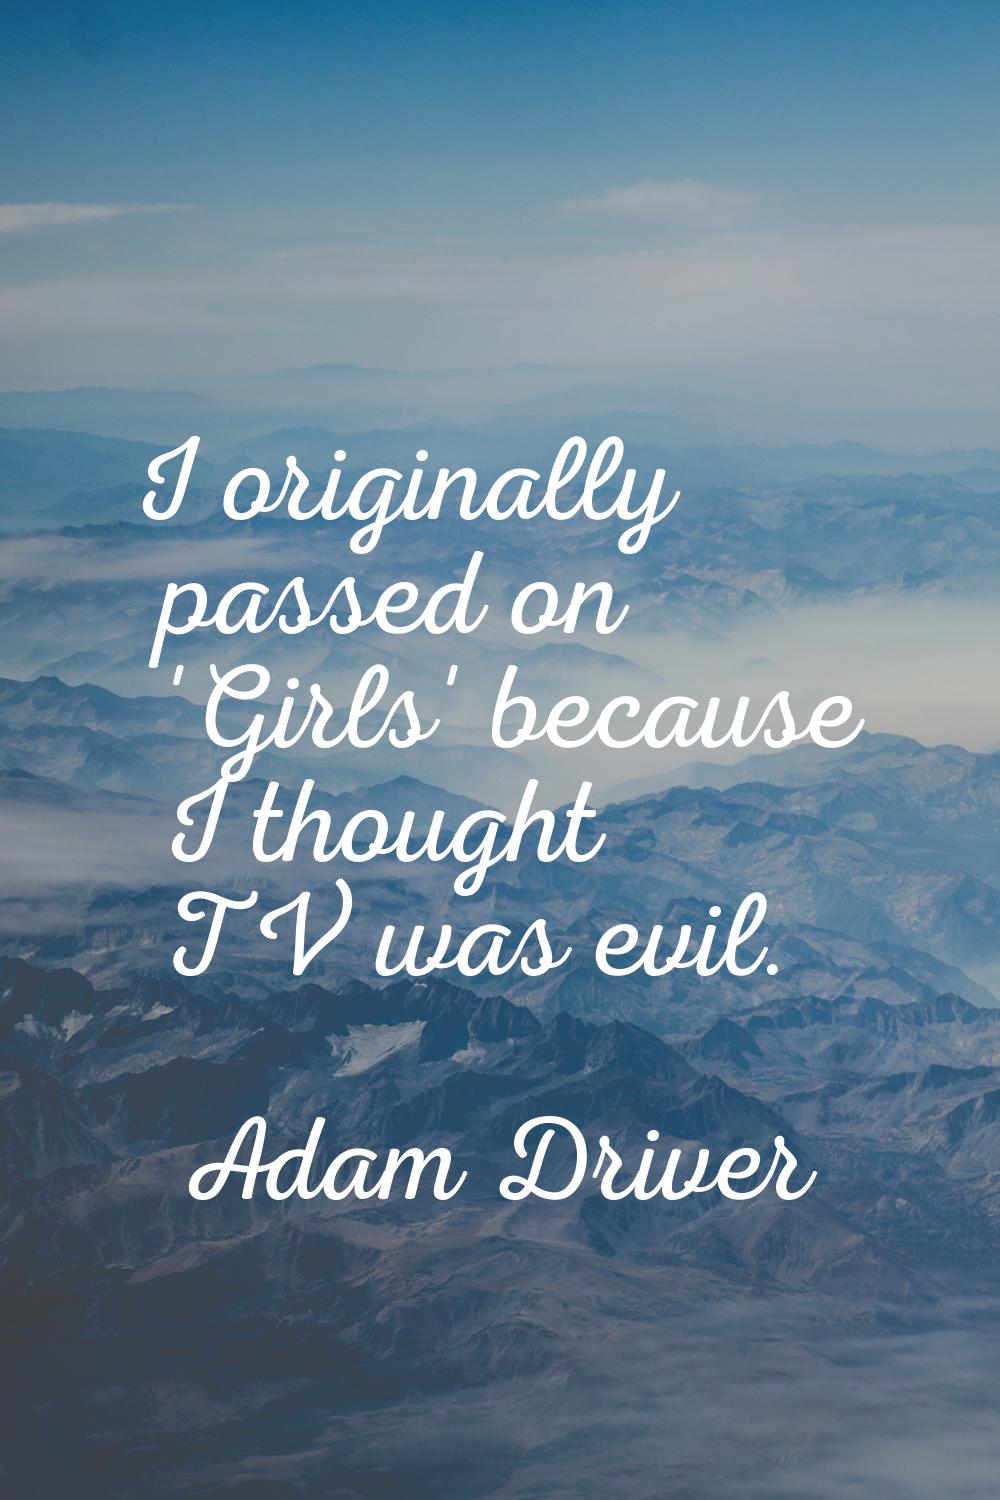 I originally passed on 'Girls' because I thought TV was evil.